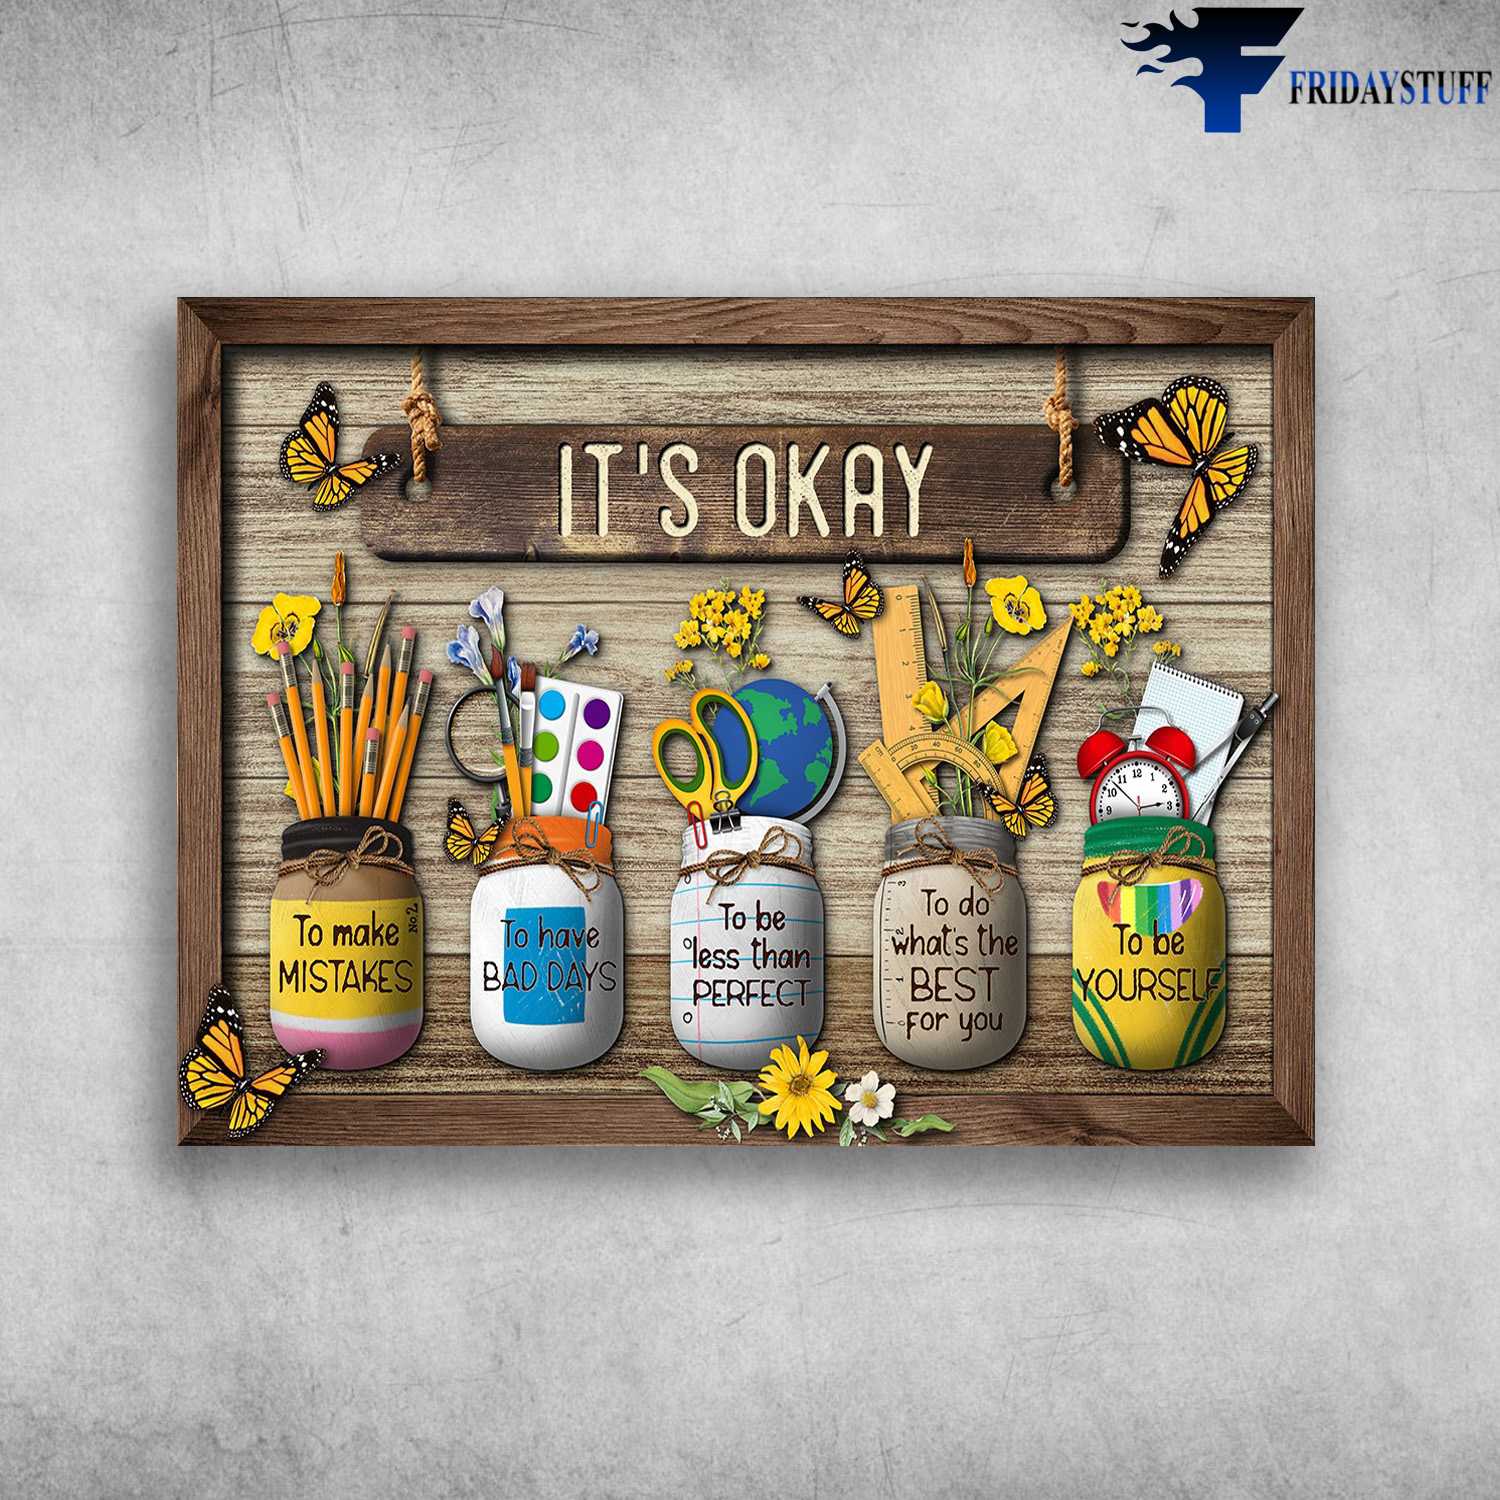 Learning Tools, Class Poster - It's Okay, To Make Mistakes, To Have Bad Days, To Be Less Than Perfect, To Do Whats The Best For You, To Be Yourself